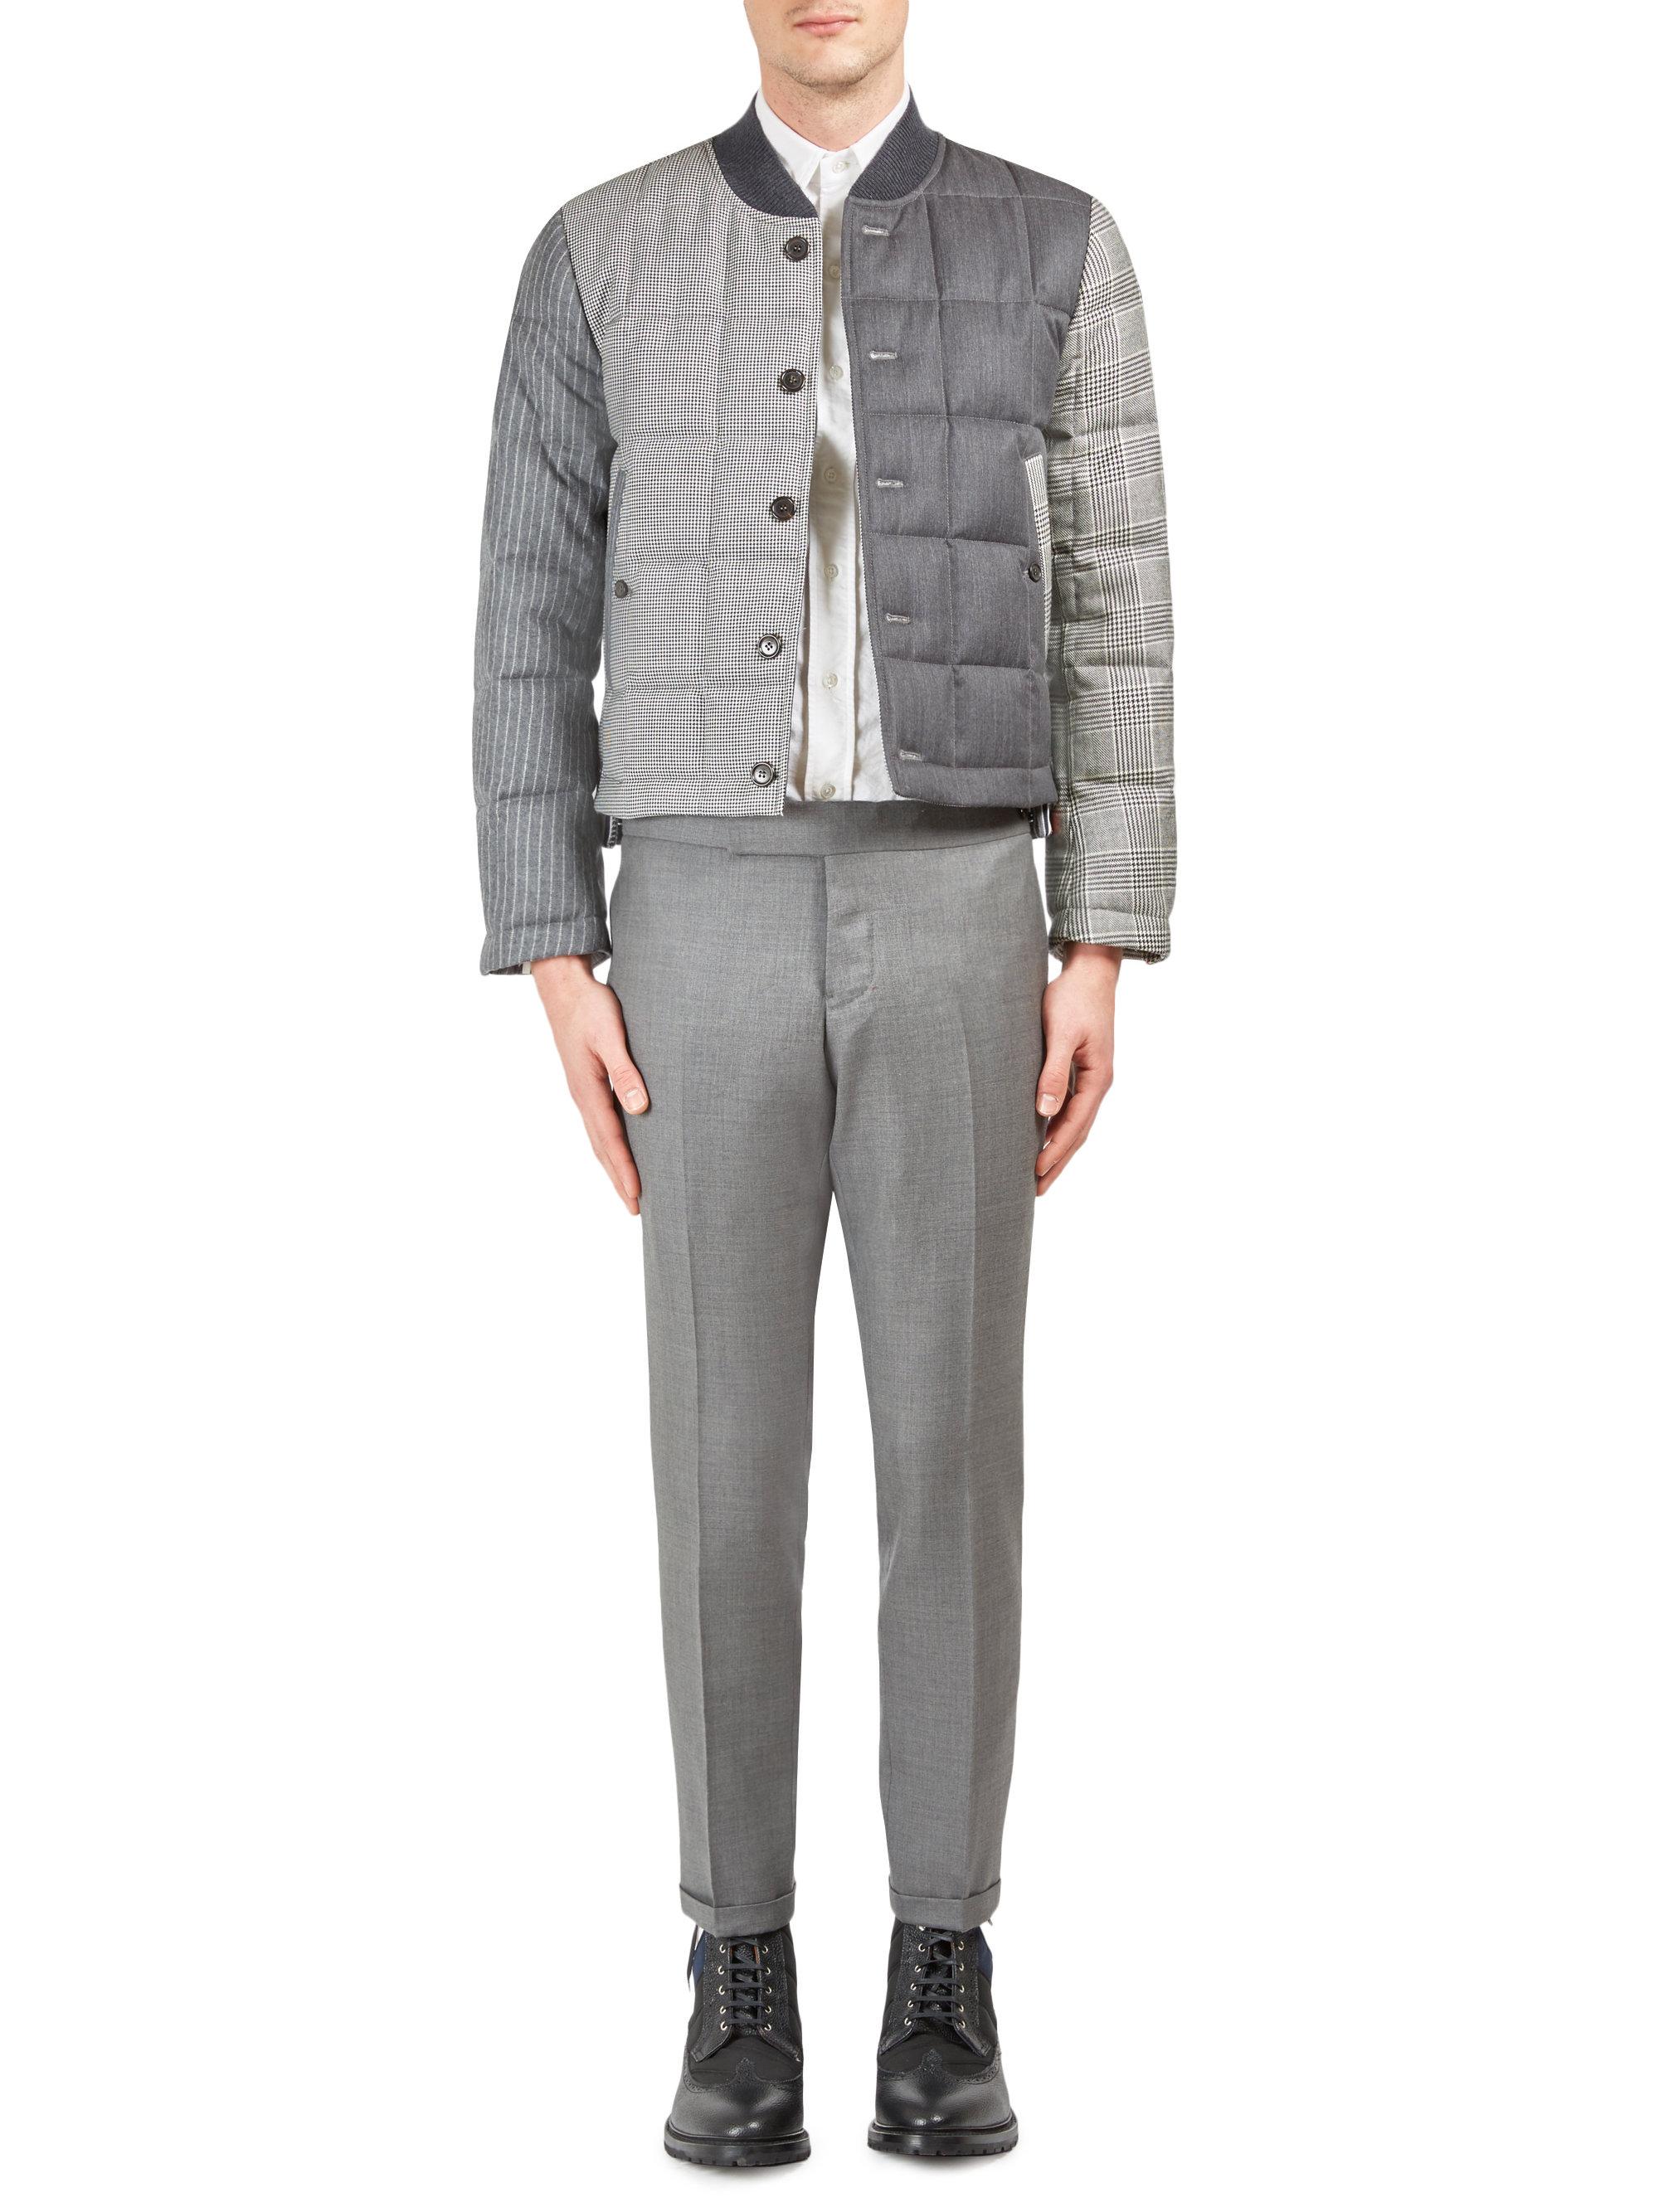 Lyst - Thom Browne Downfilled Puffer Jacket in Gray for Men